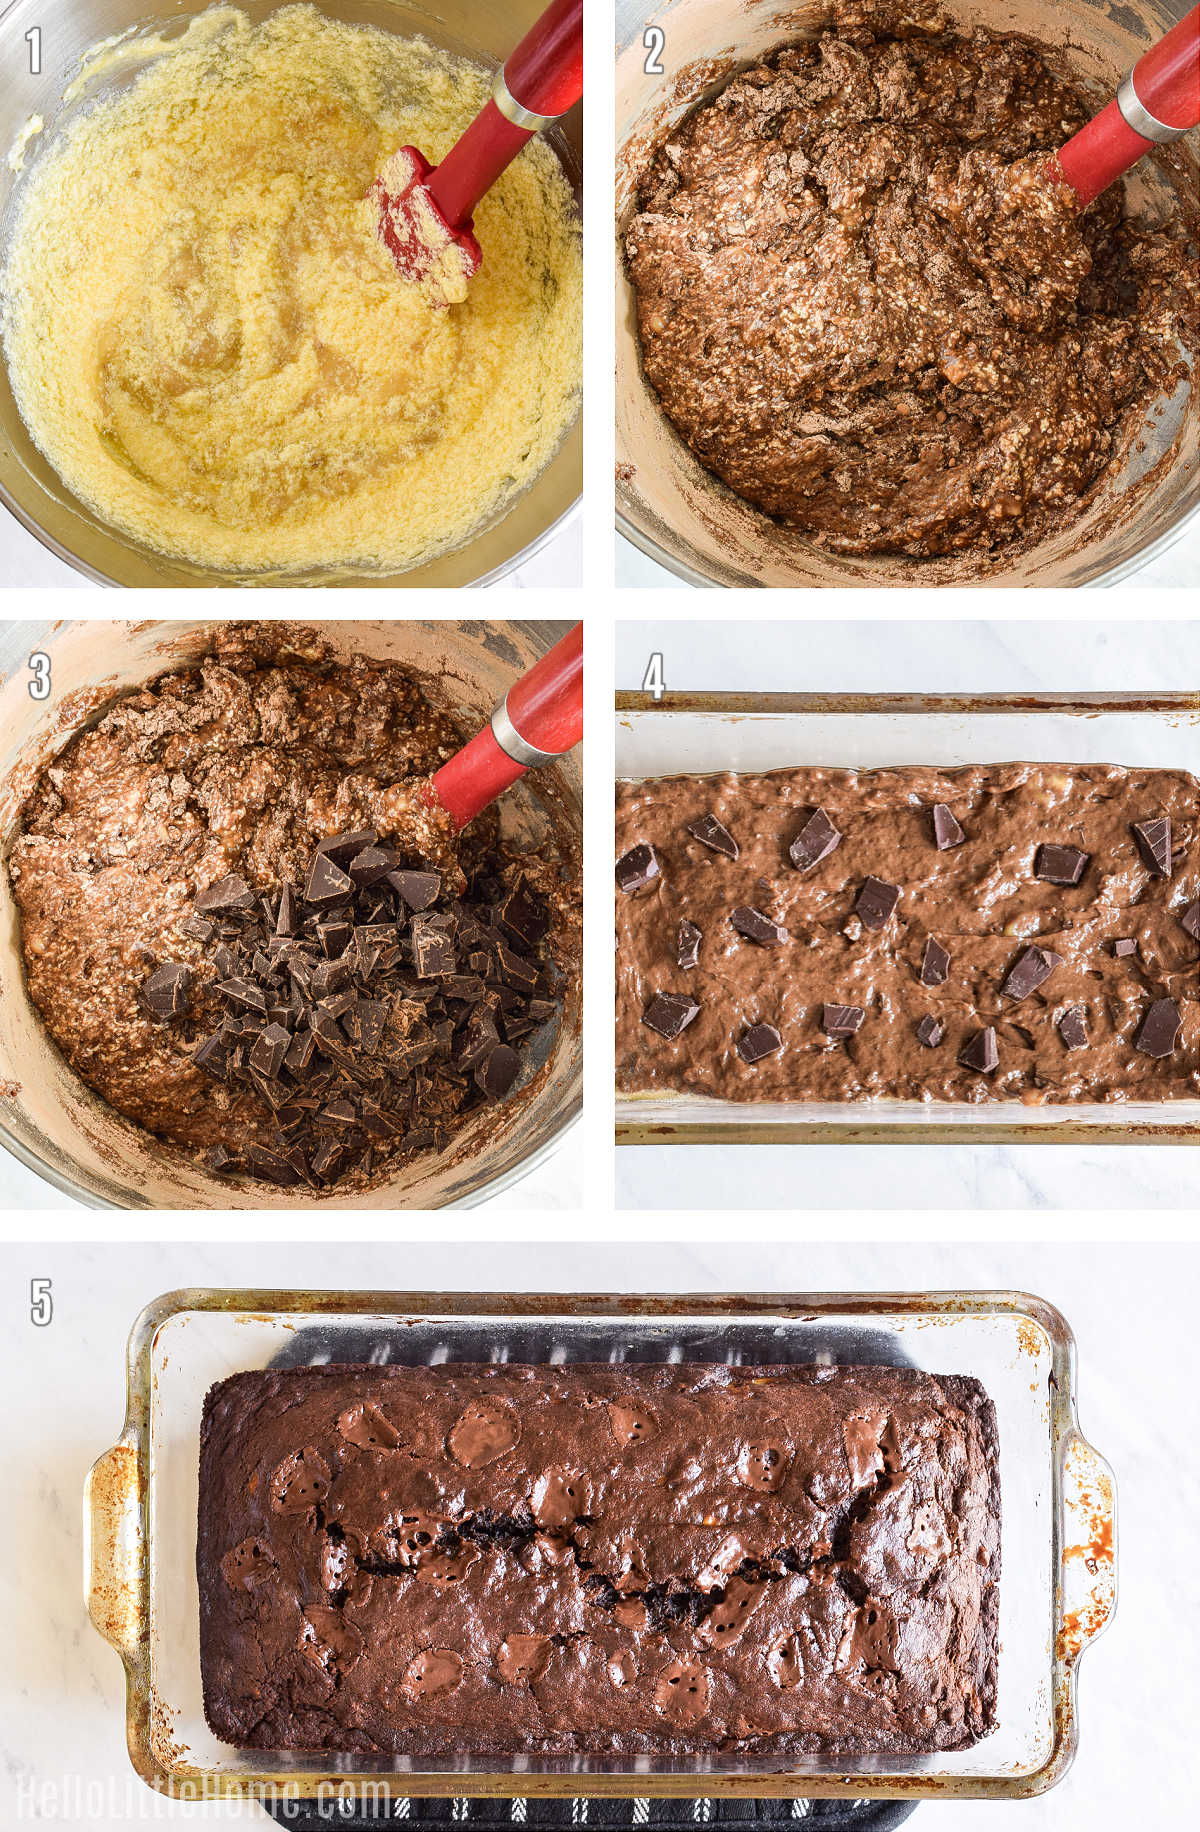 A photo collage showing how to make chocolate banana bread step-by-step.